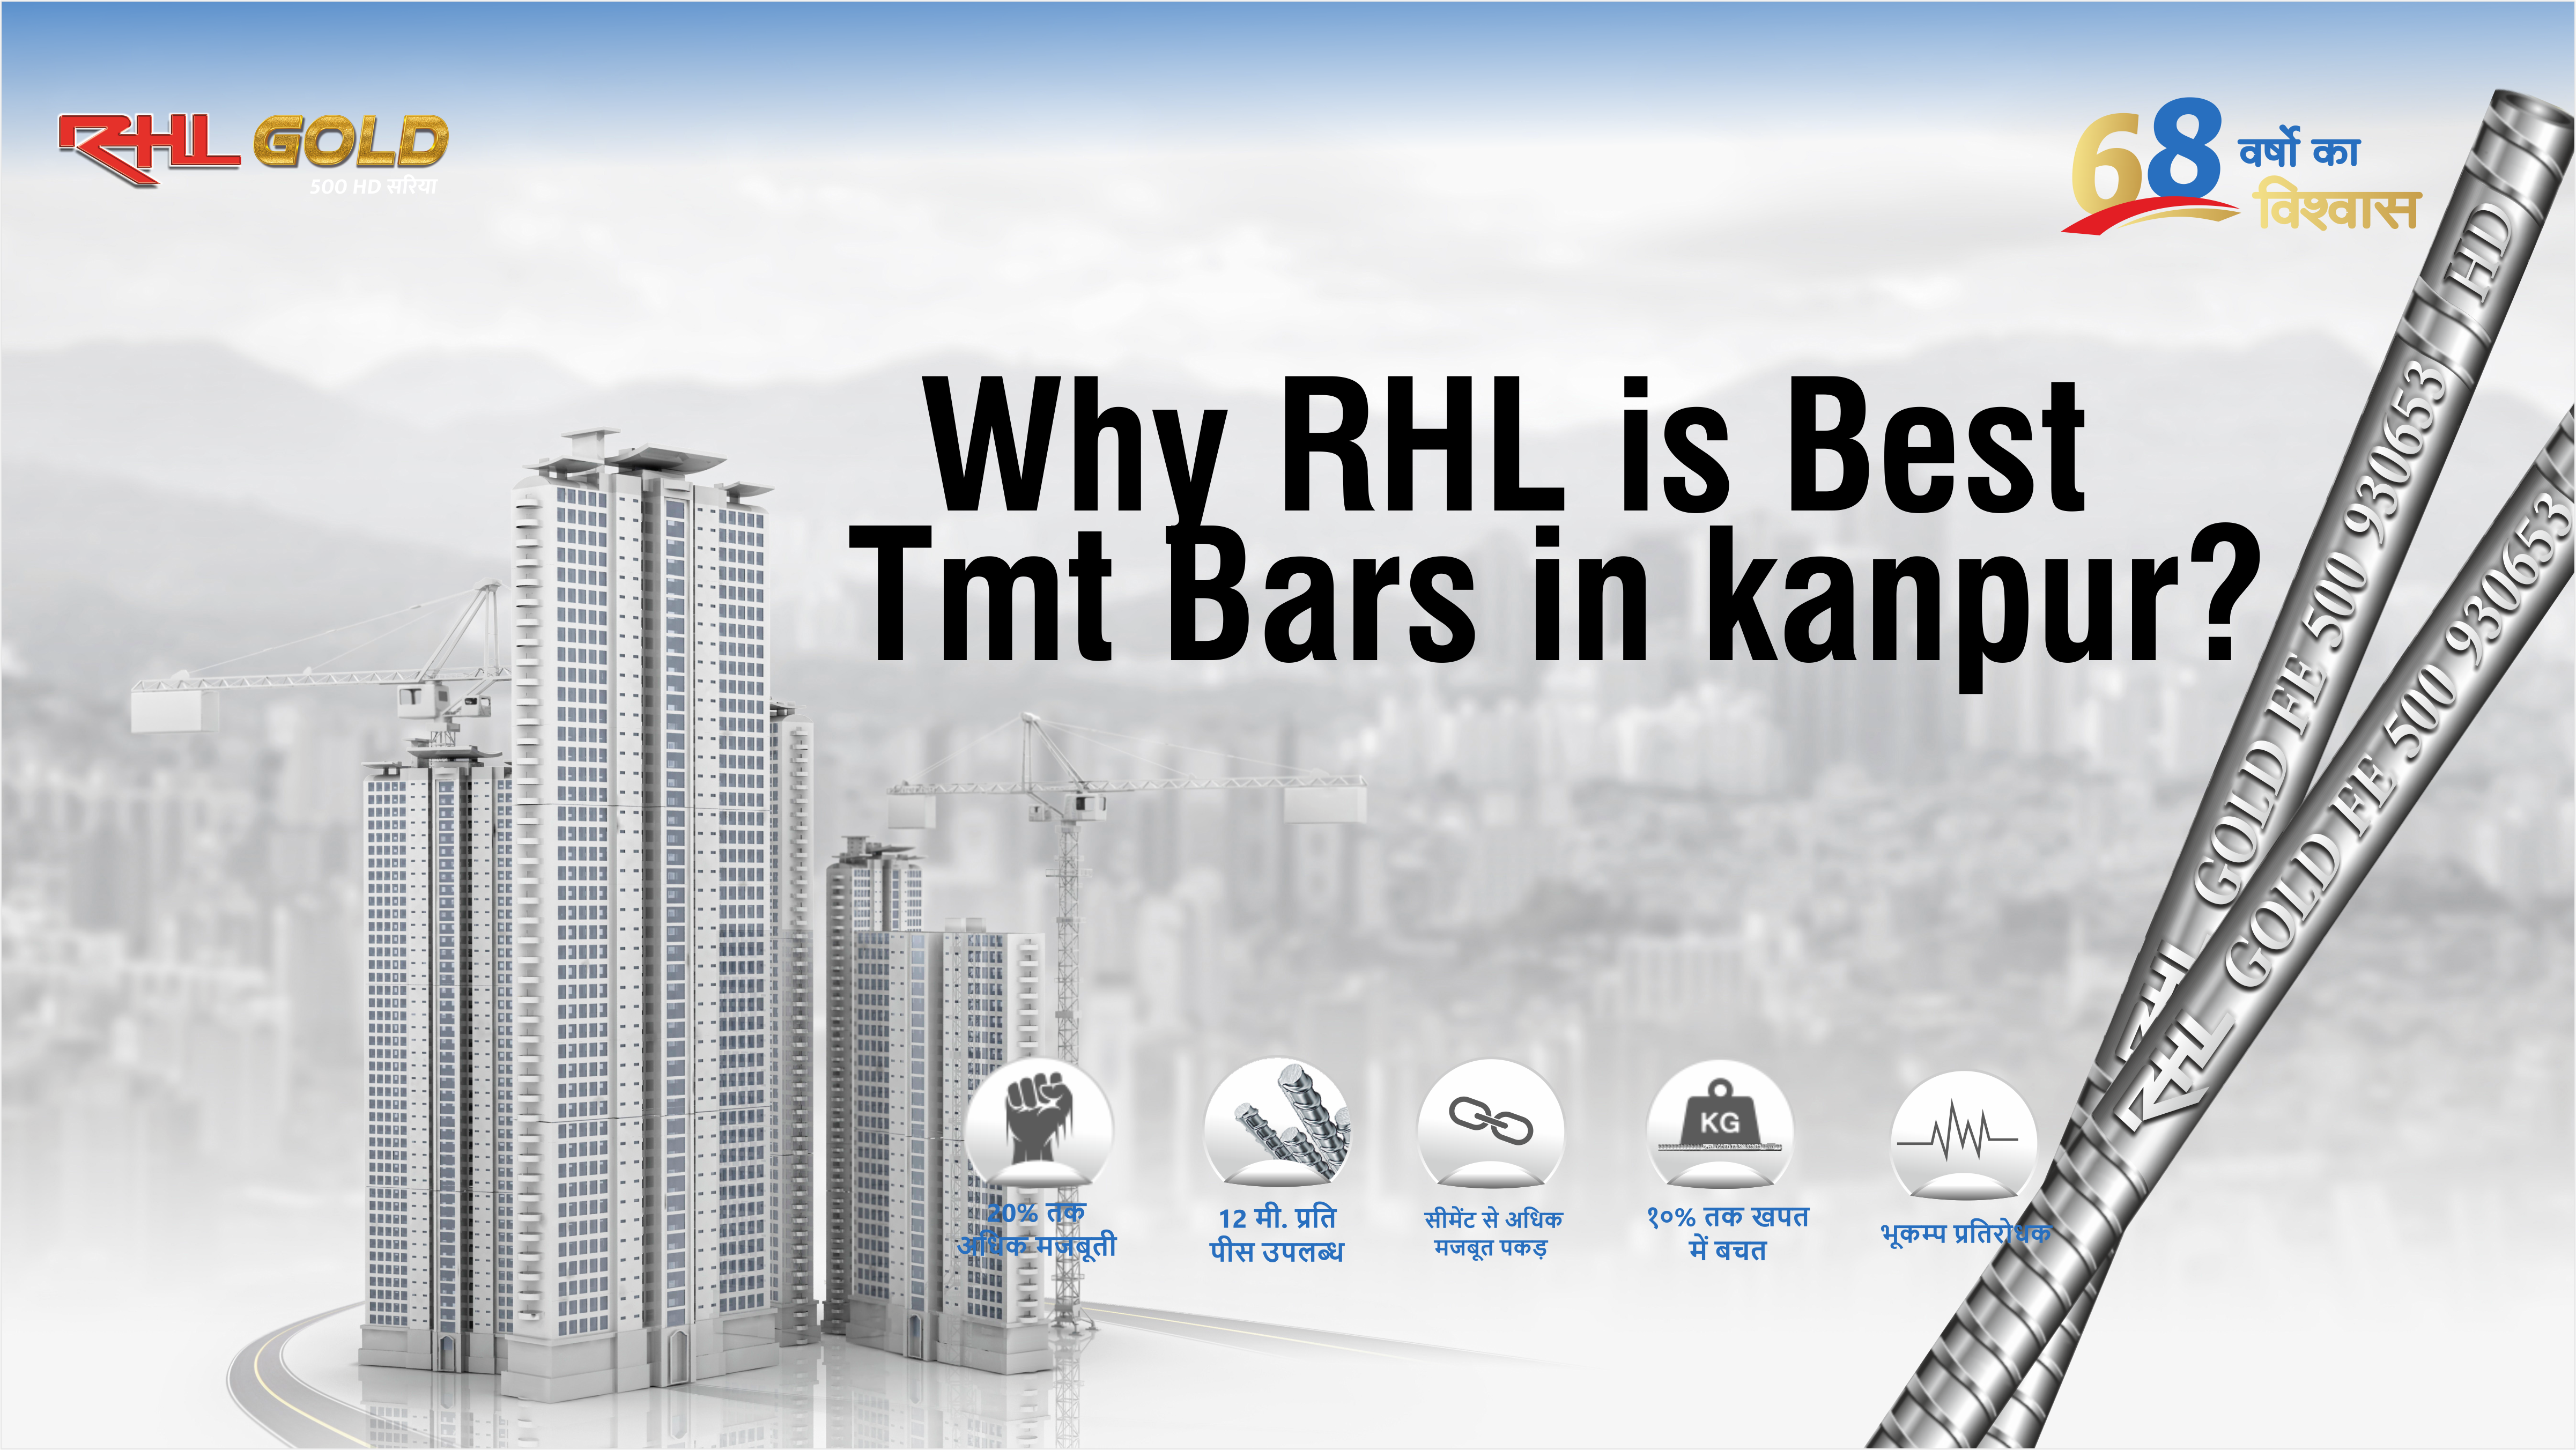 Why RHL is Best Tmt Bars in kanpur?